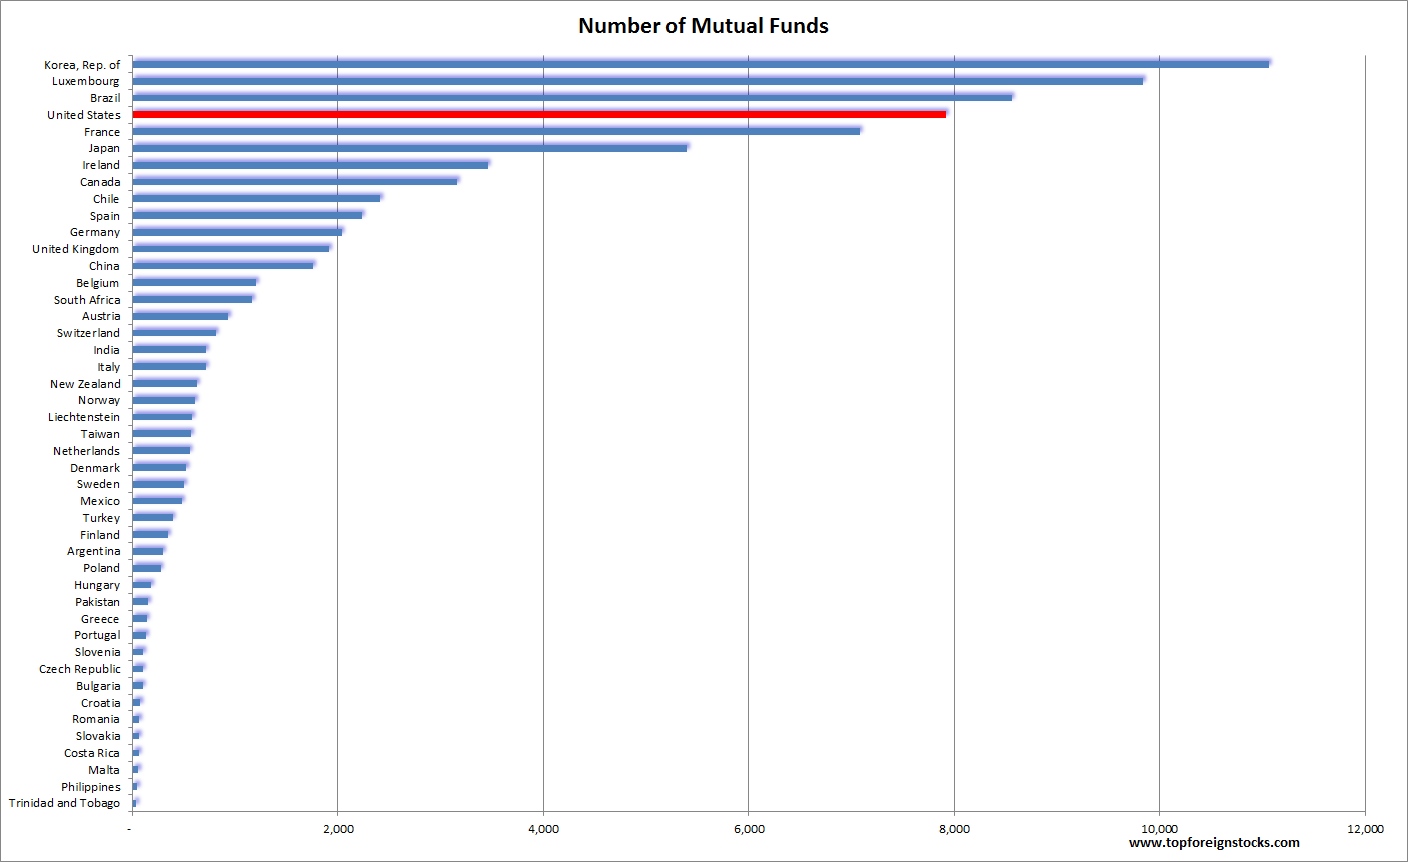 Number of Mutual Funds by COuntry